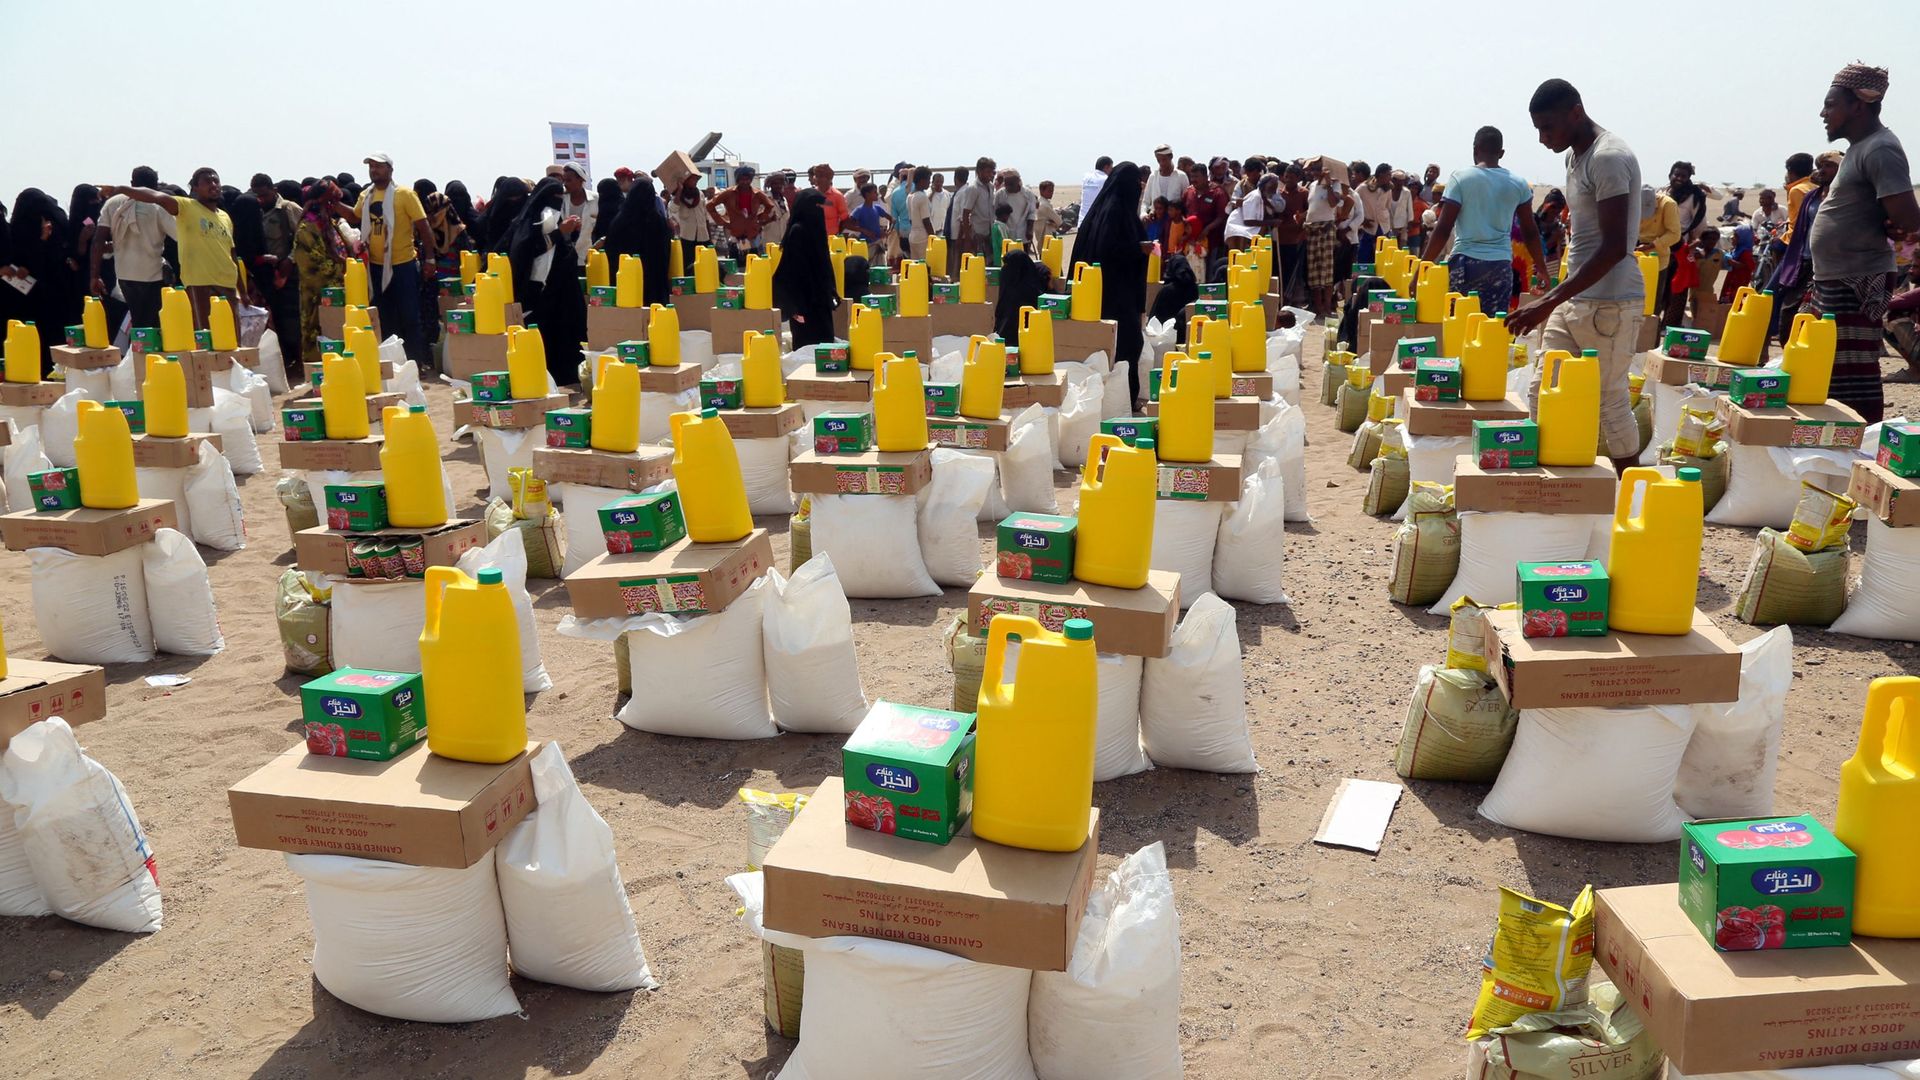 Yemenis displaced by the conflict, receive food aid and supplies to meet their basic needs, at a camp in Hays district in the war-ravaged western province of Hodeida on August 31.